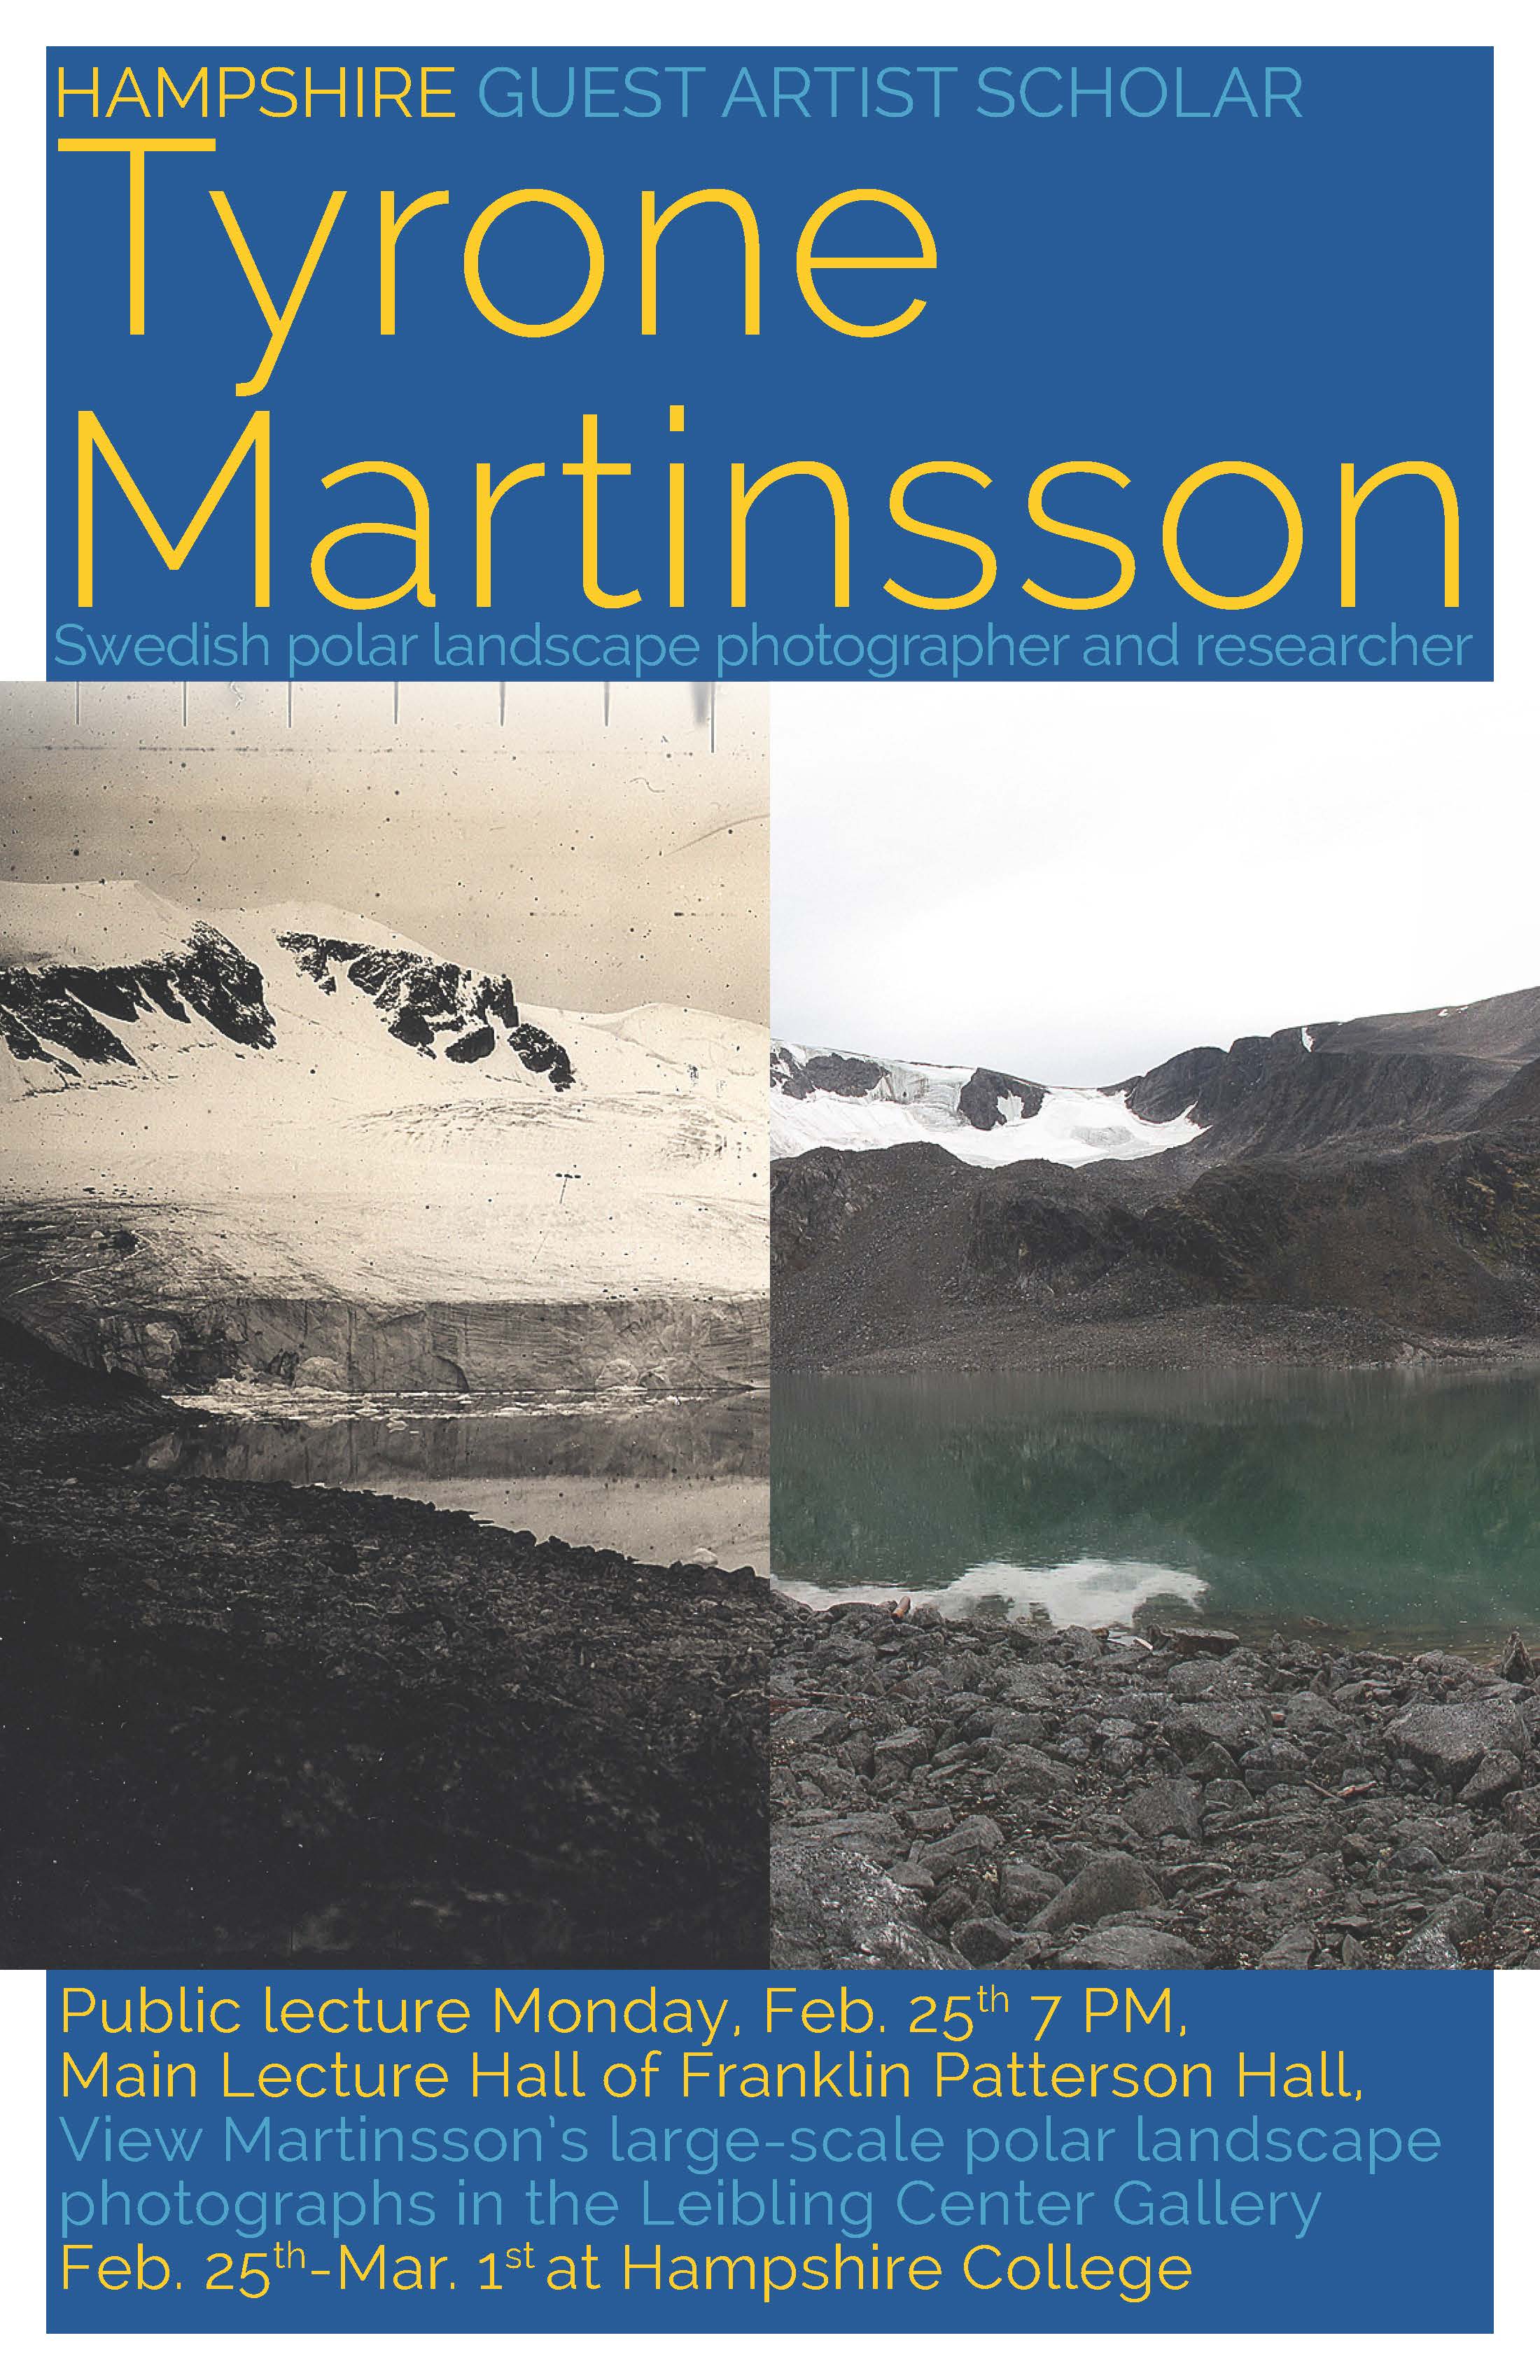 Speech about polar landscape by Tyrone Martinsson, February 25th, 7 pm, Main Lecture Hall of FPH and view his photographs on February 25th -March 1st at Hampshire college